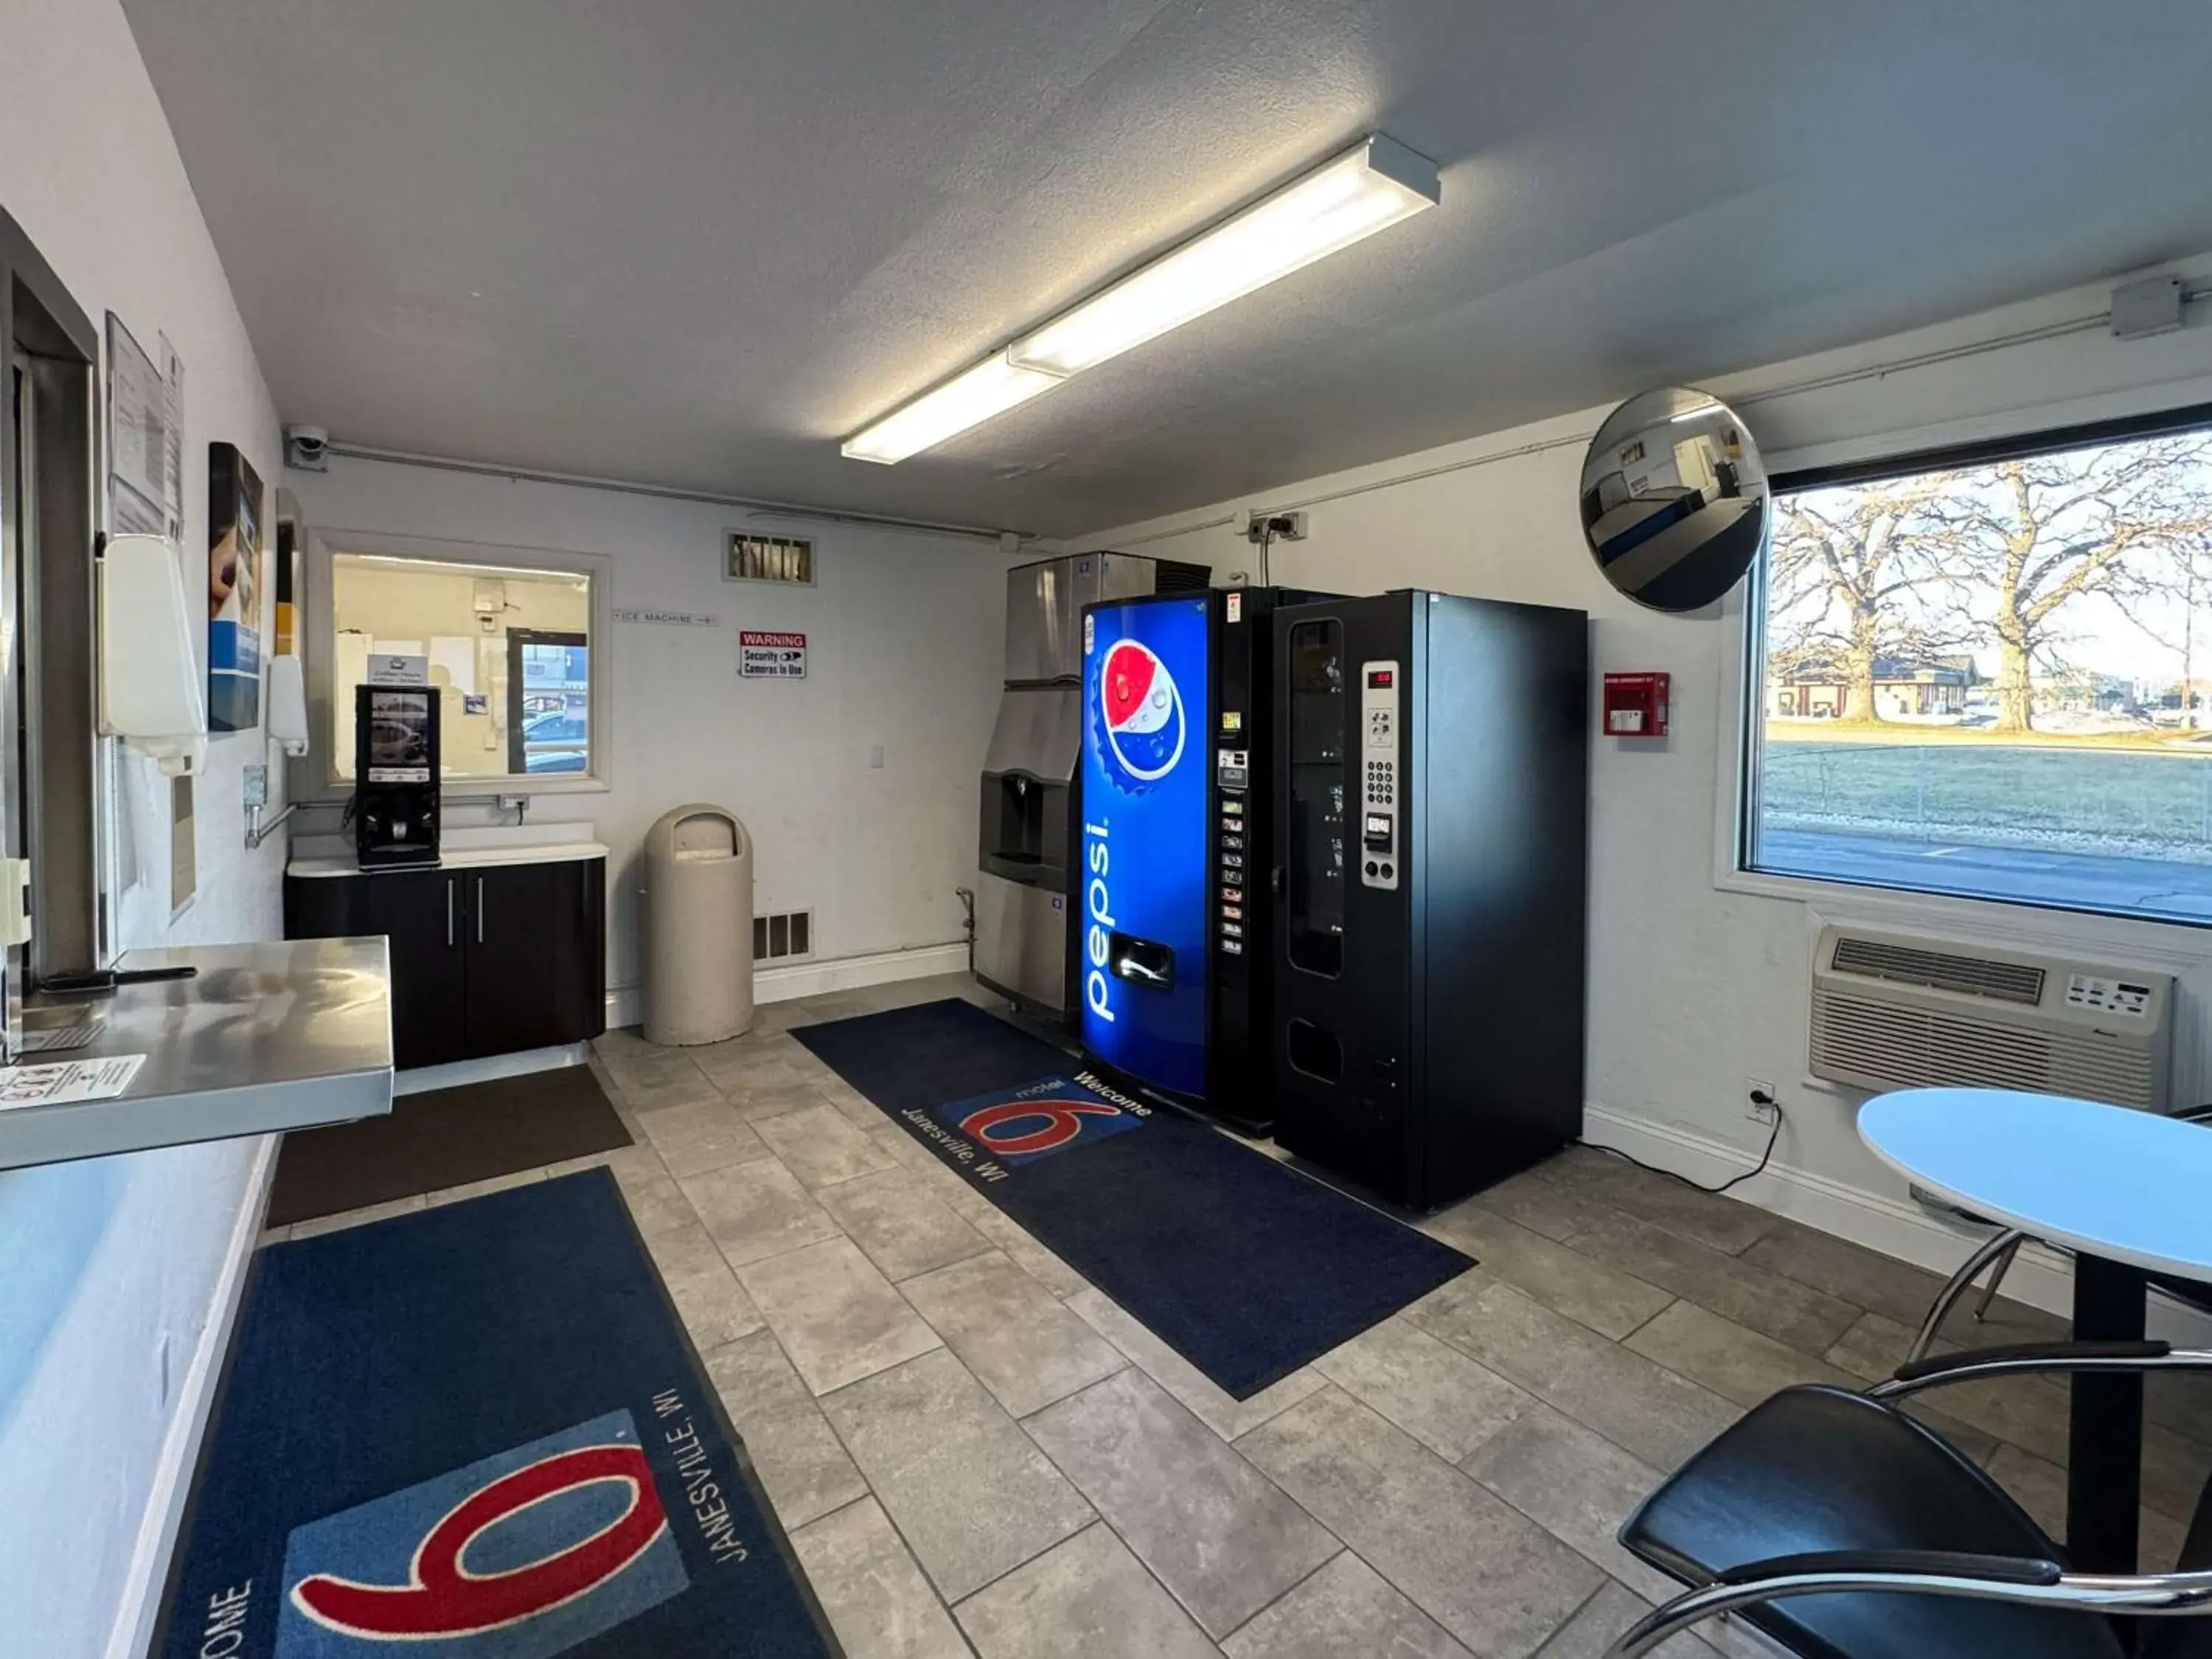 Property building in Motel 6-Janesville, WI